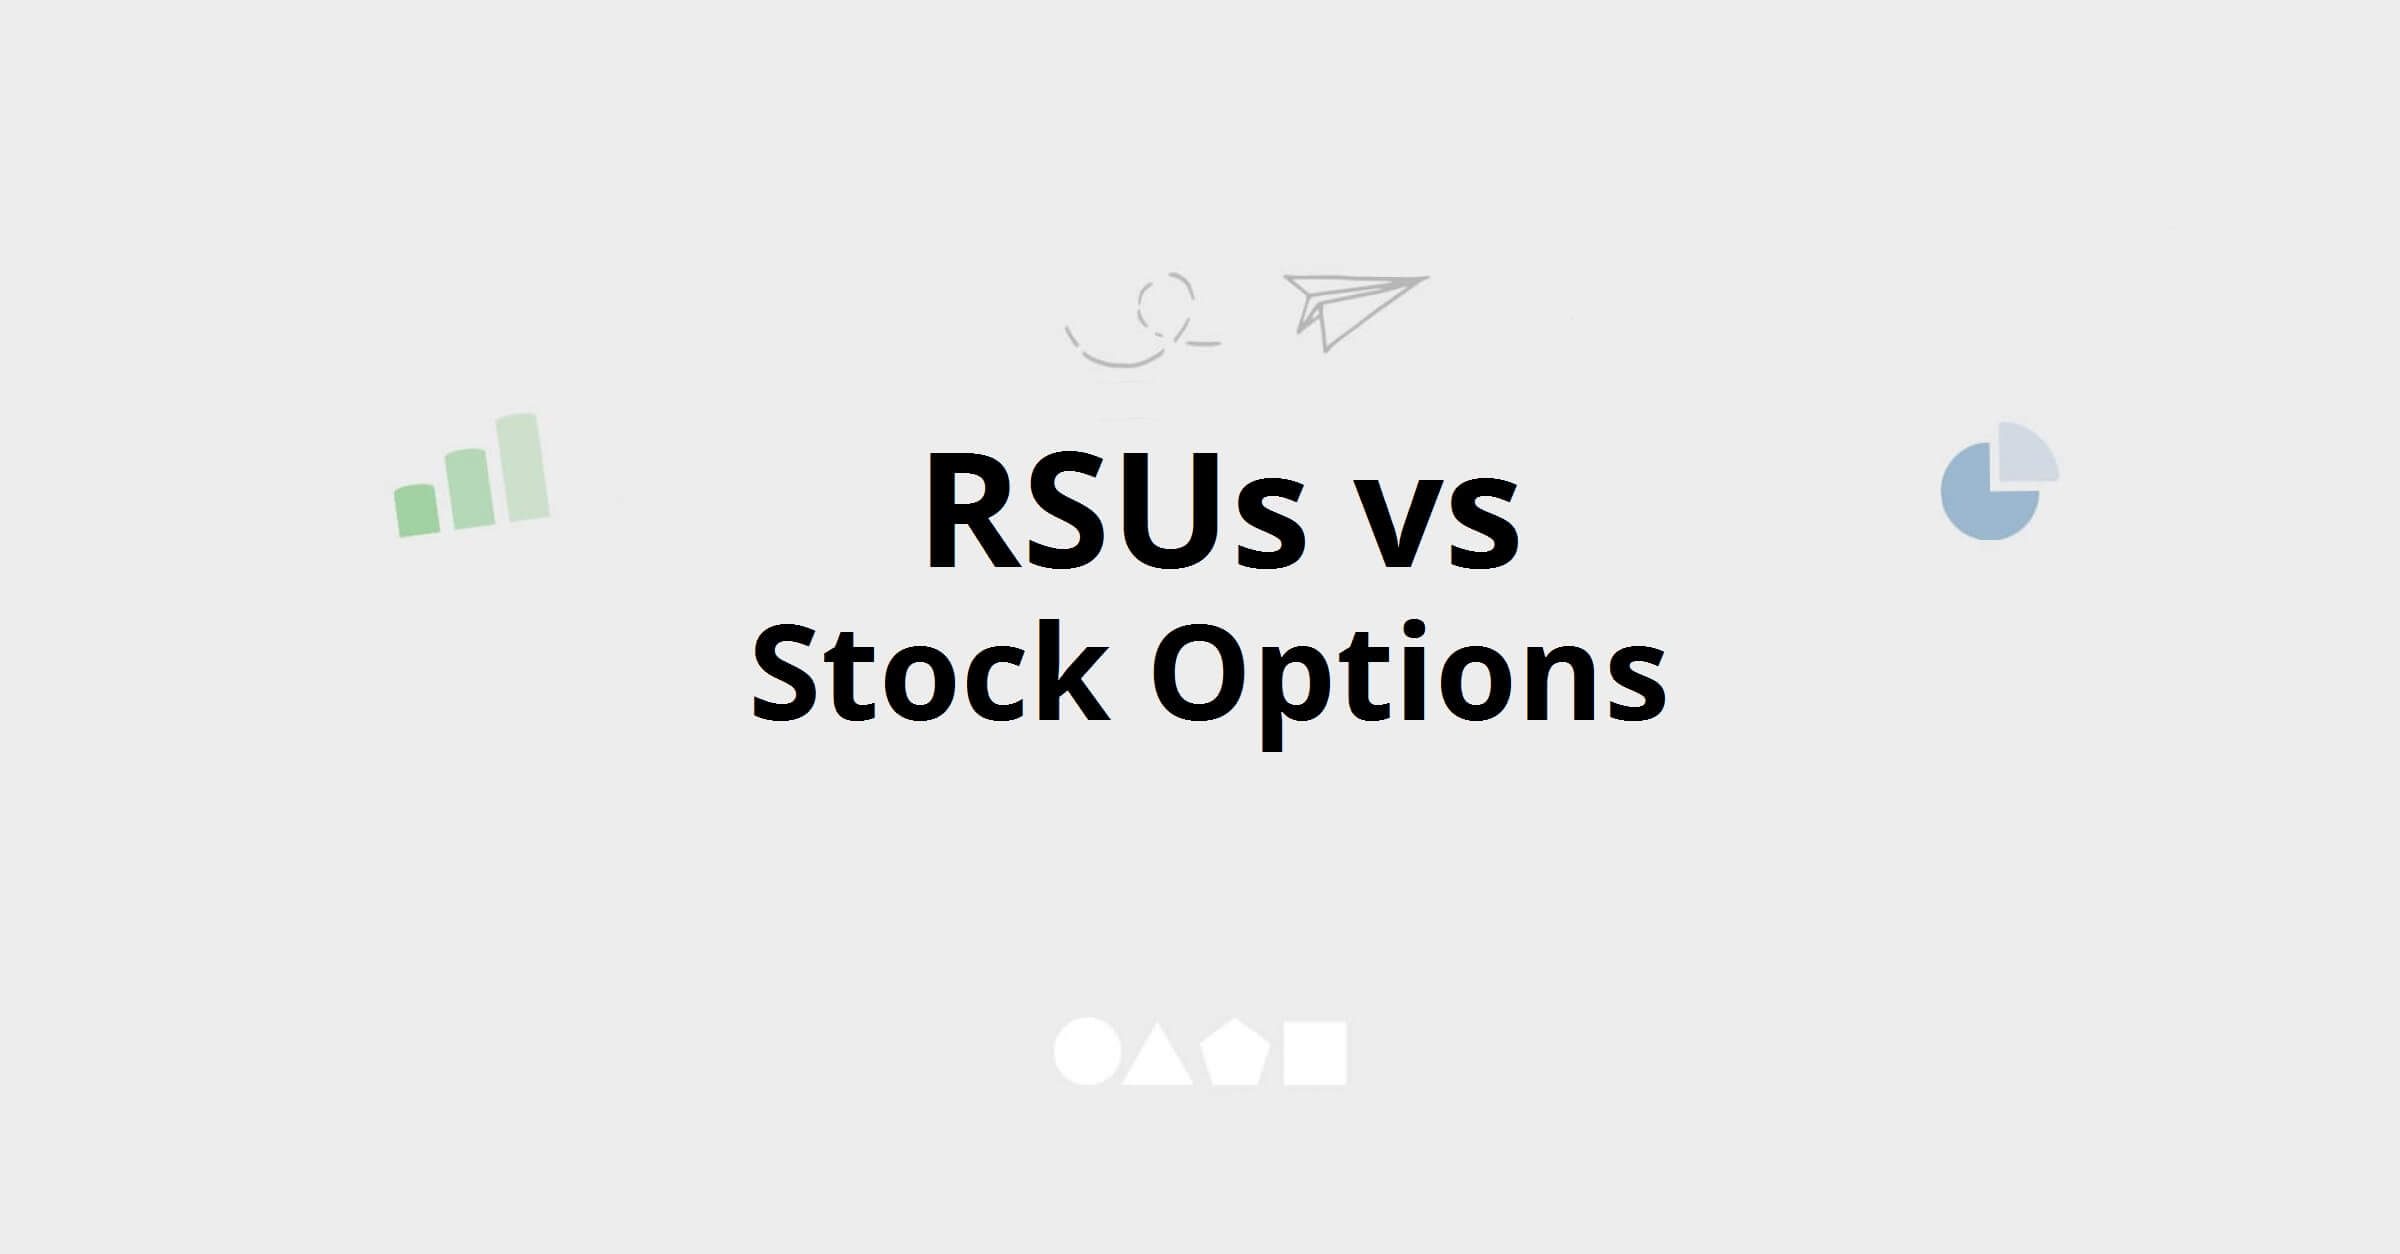 Stock Options vs Restricted Stock Units (RSUs)